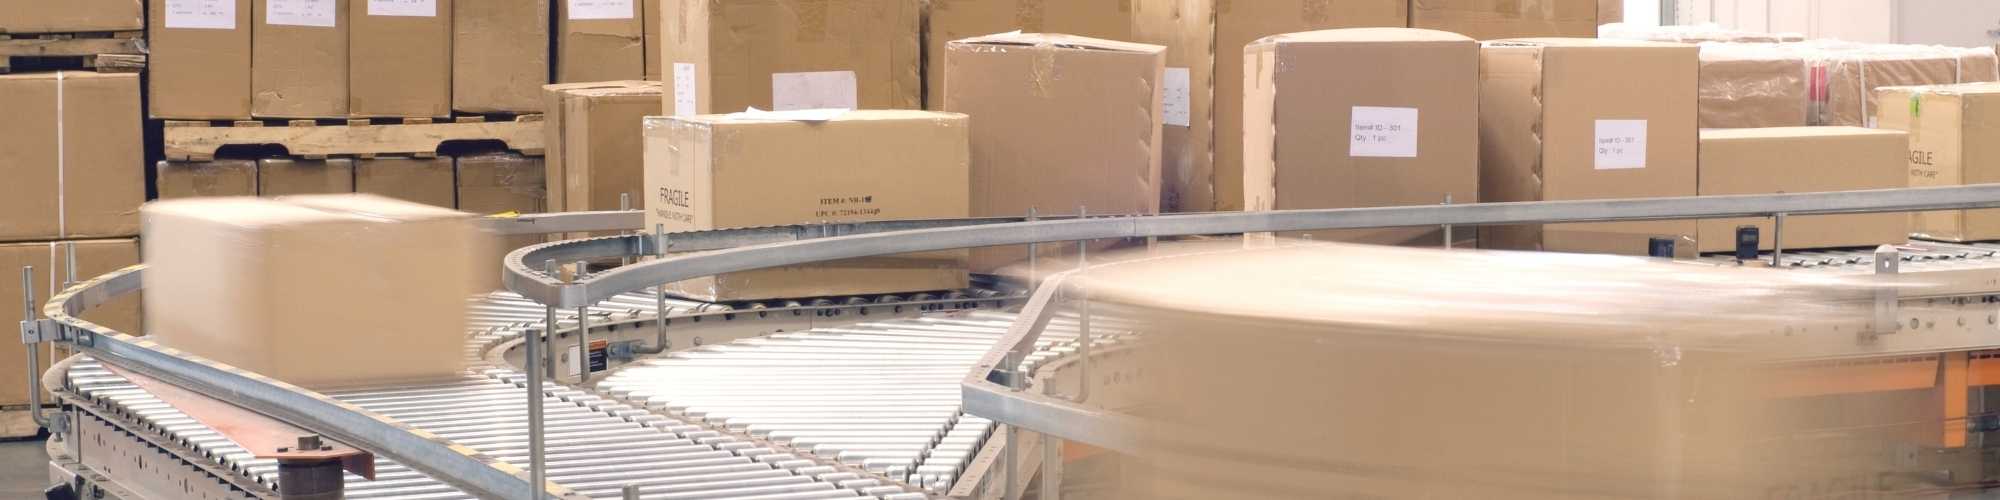 Warehouse automation showing parcels on a conveyor surrounded by pallets of boxes